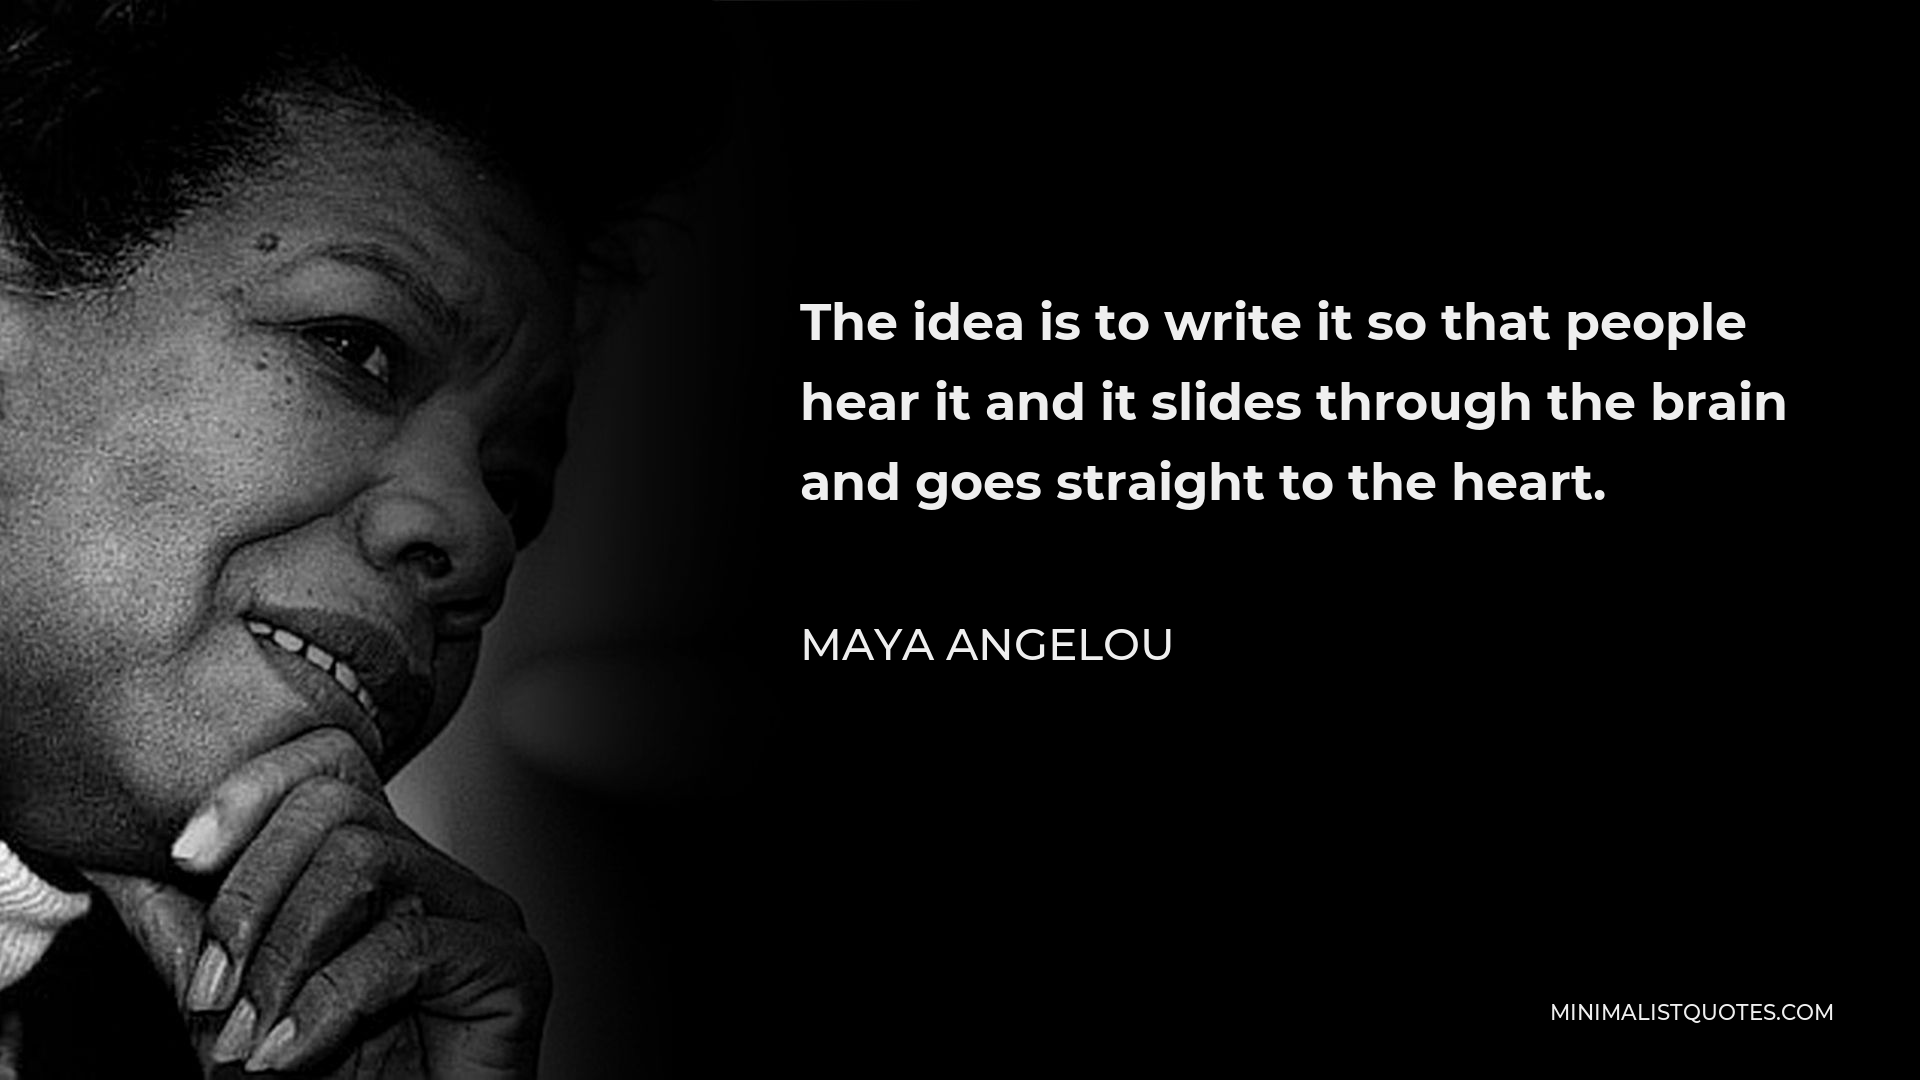 Maya Angelou Quote - The idea is to write it so that people hear it and it slides through the brain and goes straight to the heart.